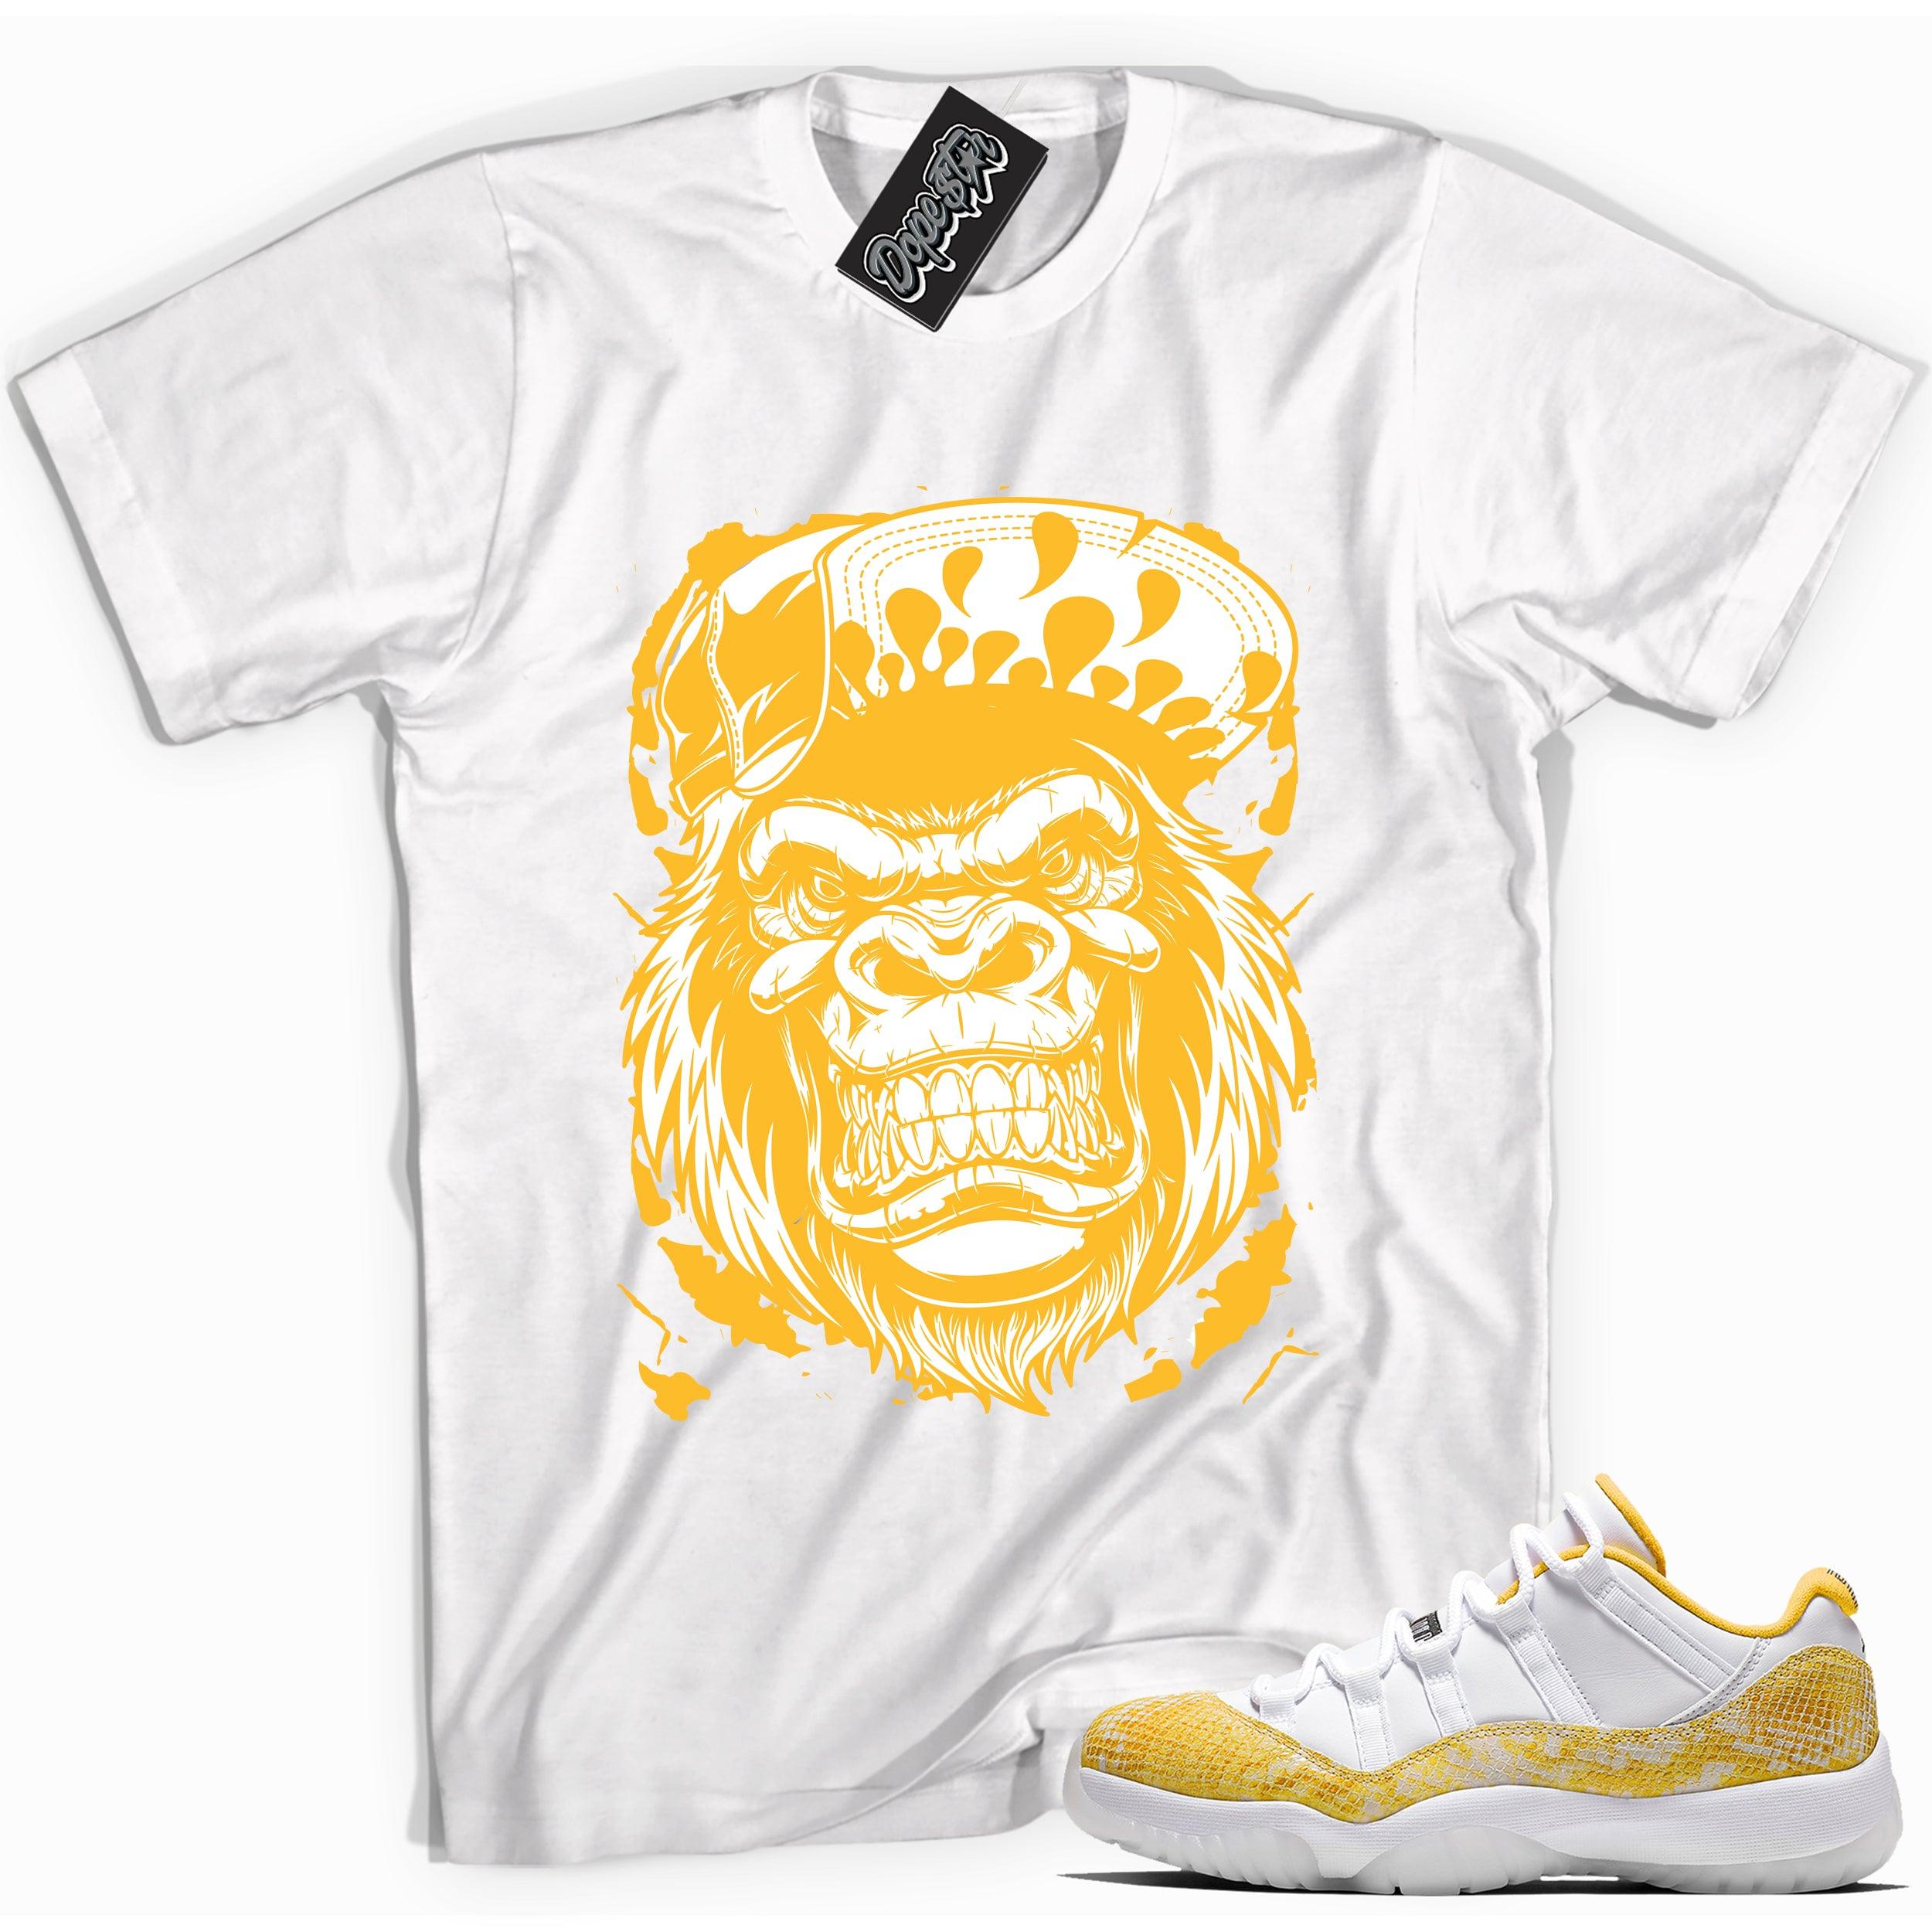 Cool white graphic tee with 'gorilla beast' print, that perfectly matches Air Jordan 11 Low Yellow Snakeskin sneakers